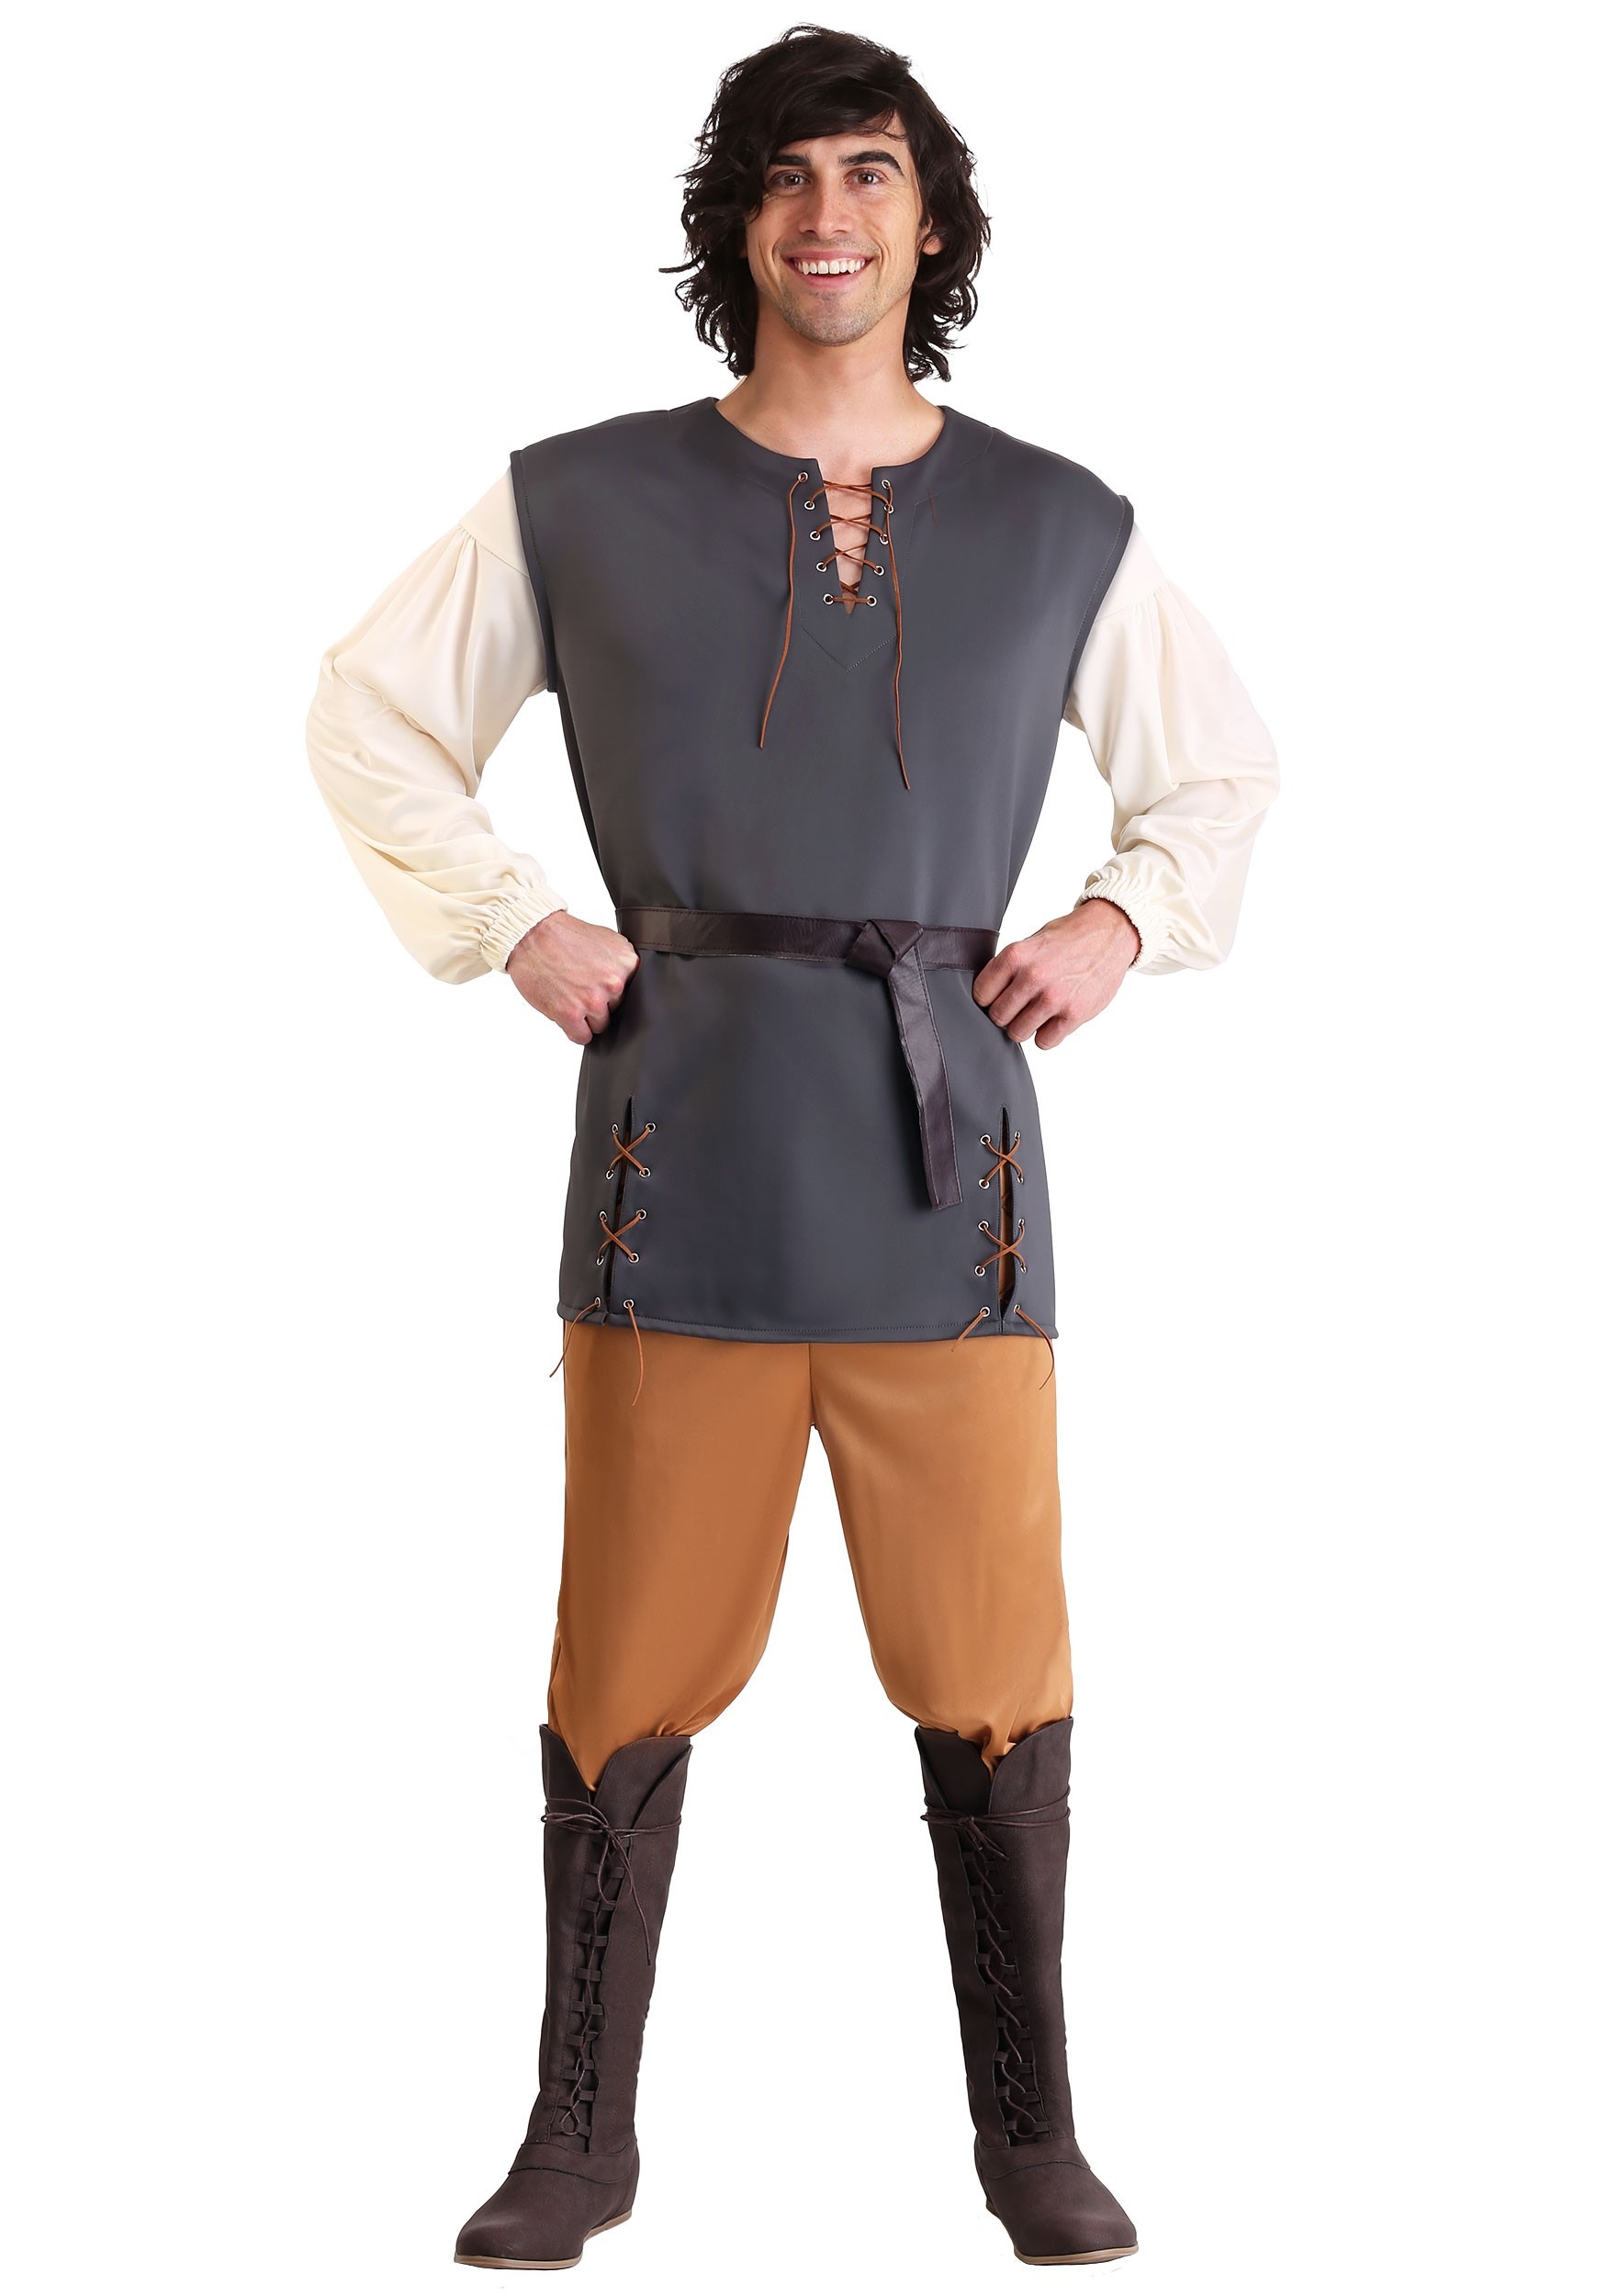 Photos - Fancy Dress FUN Costumes Adult Medieval Merry Man Costume | Medieval Costumes Brown